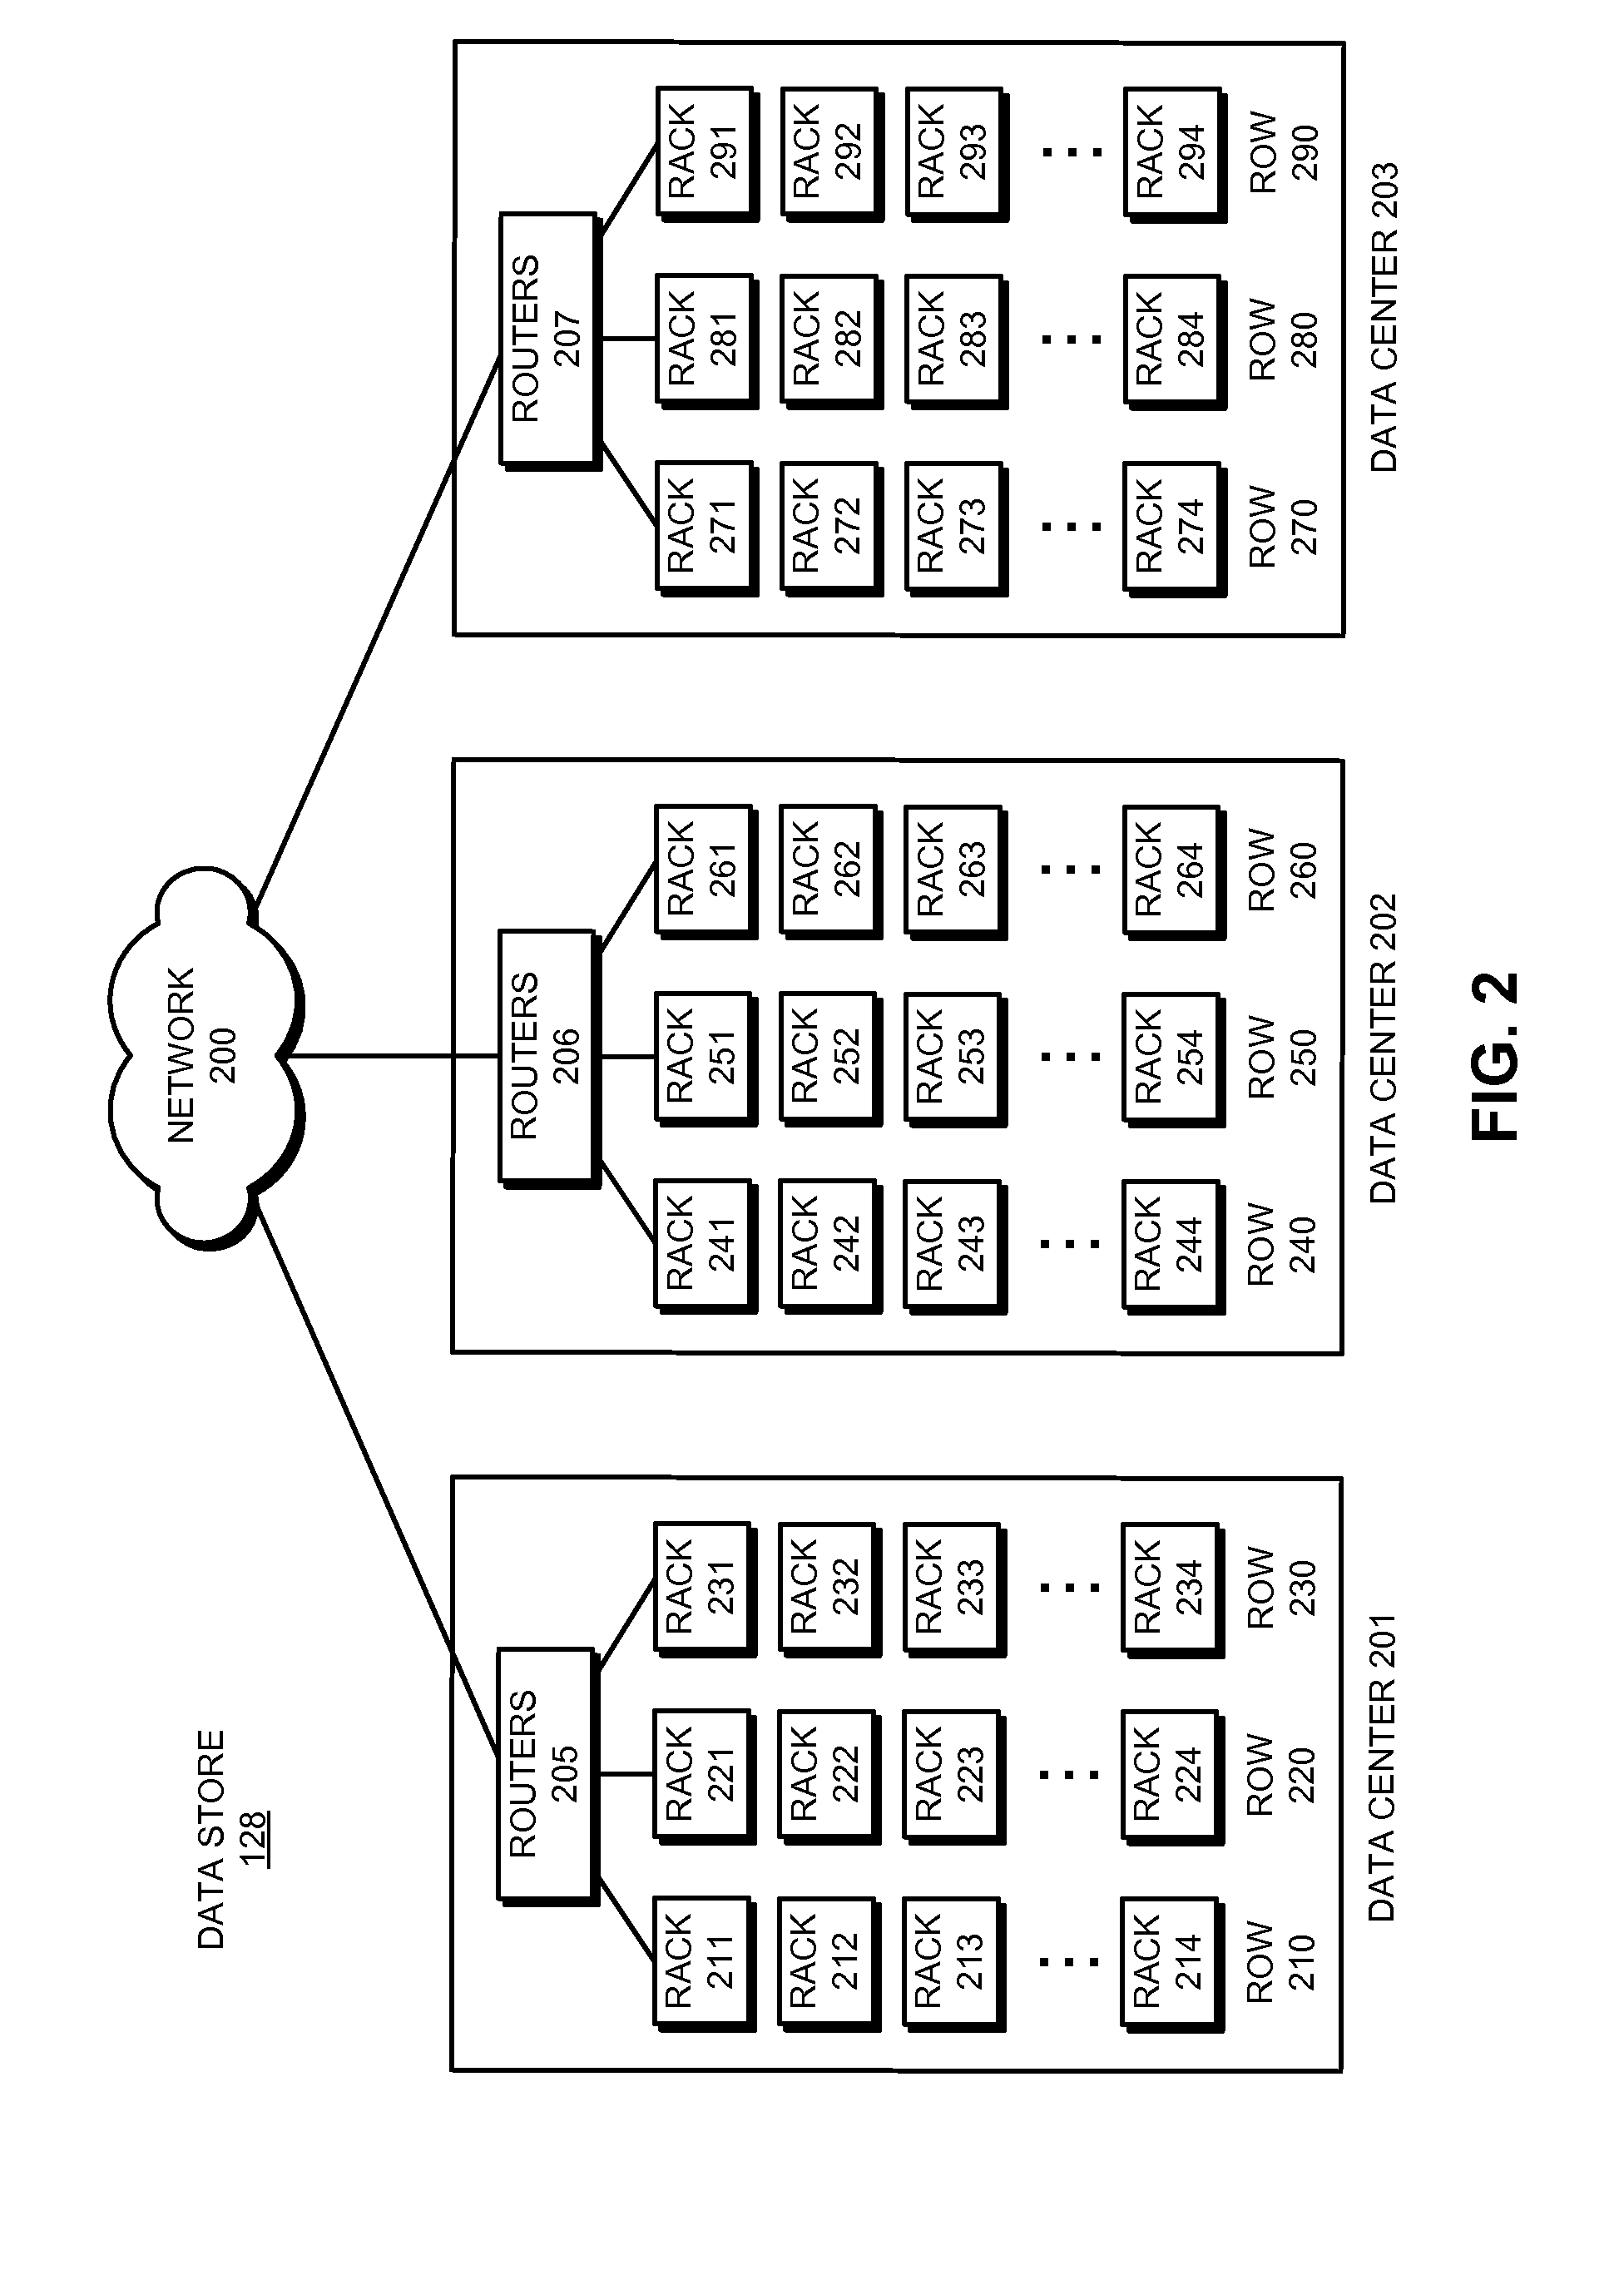 Constructing an index to facilitate accessing a closed extent in an append-only storage system